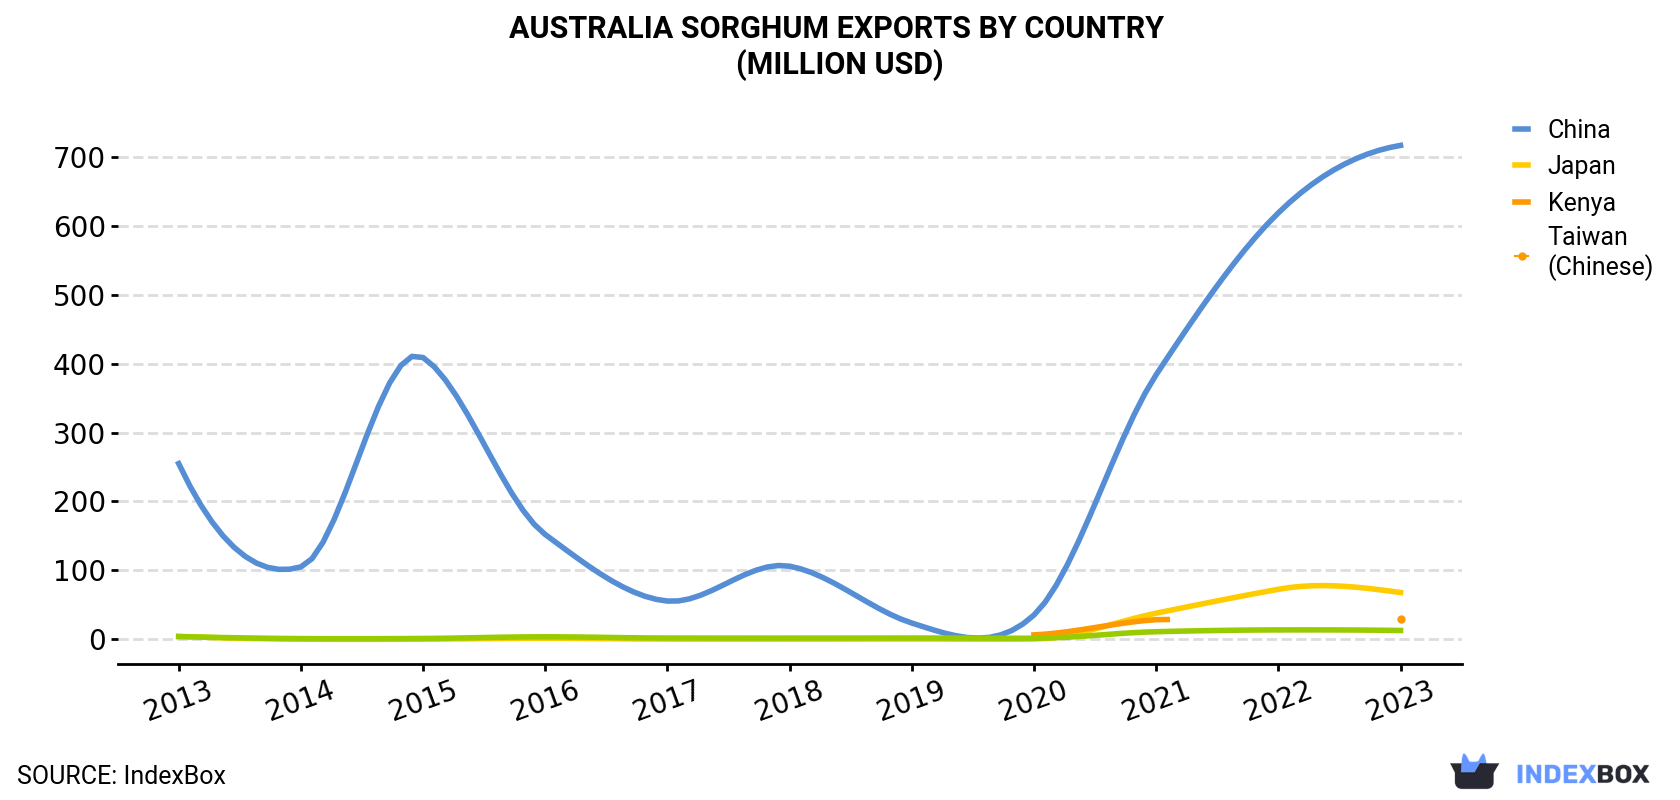 Australia Sorghum Exports By Country (Million USD)